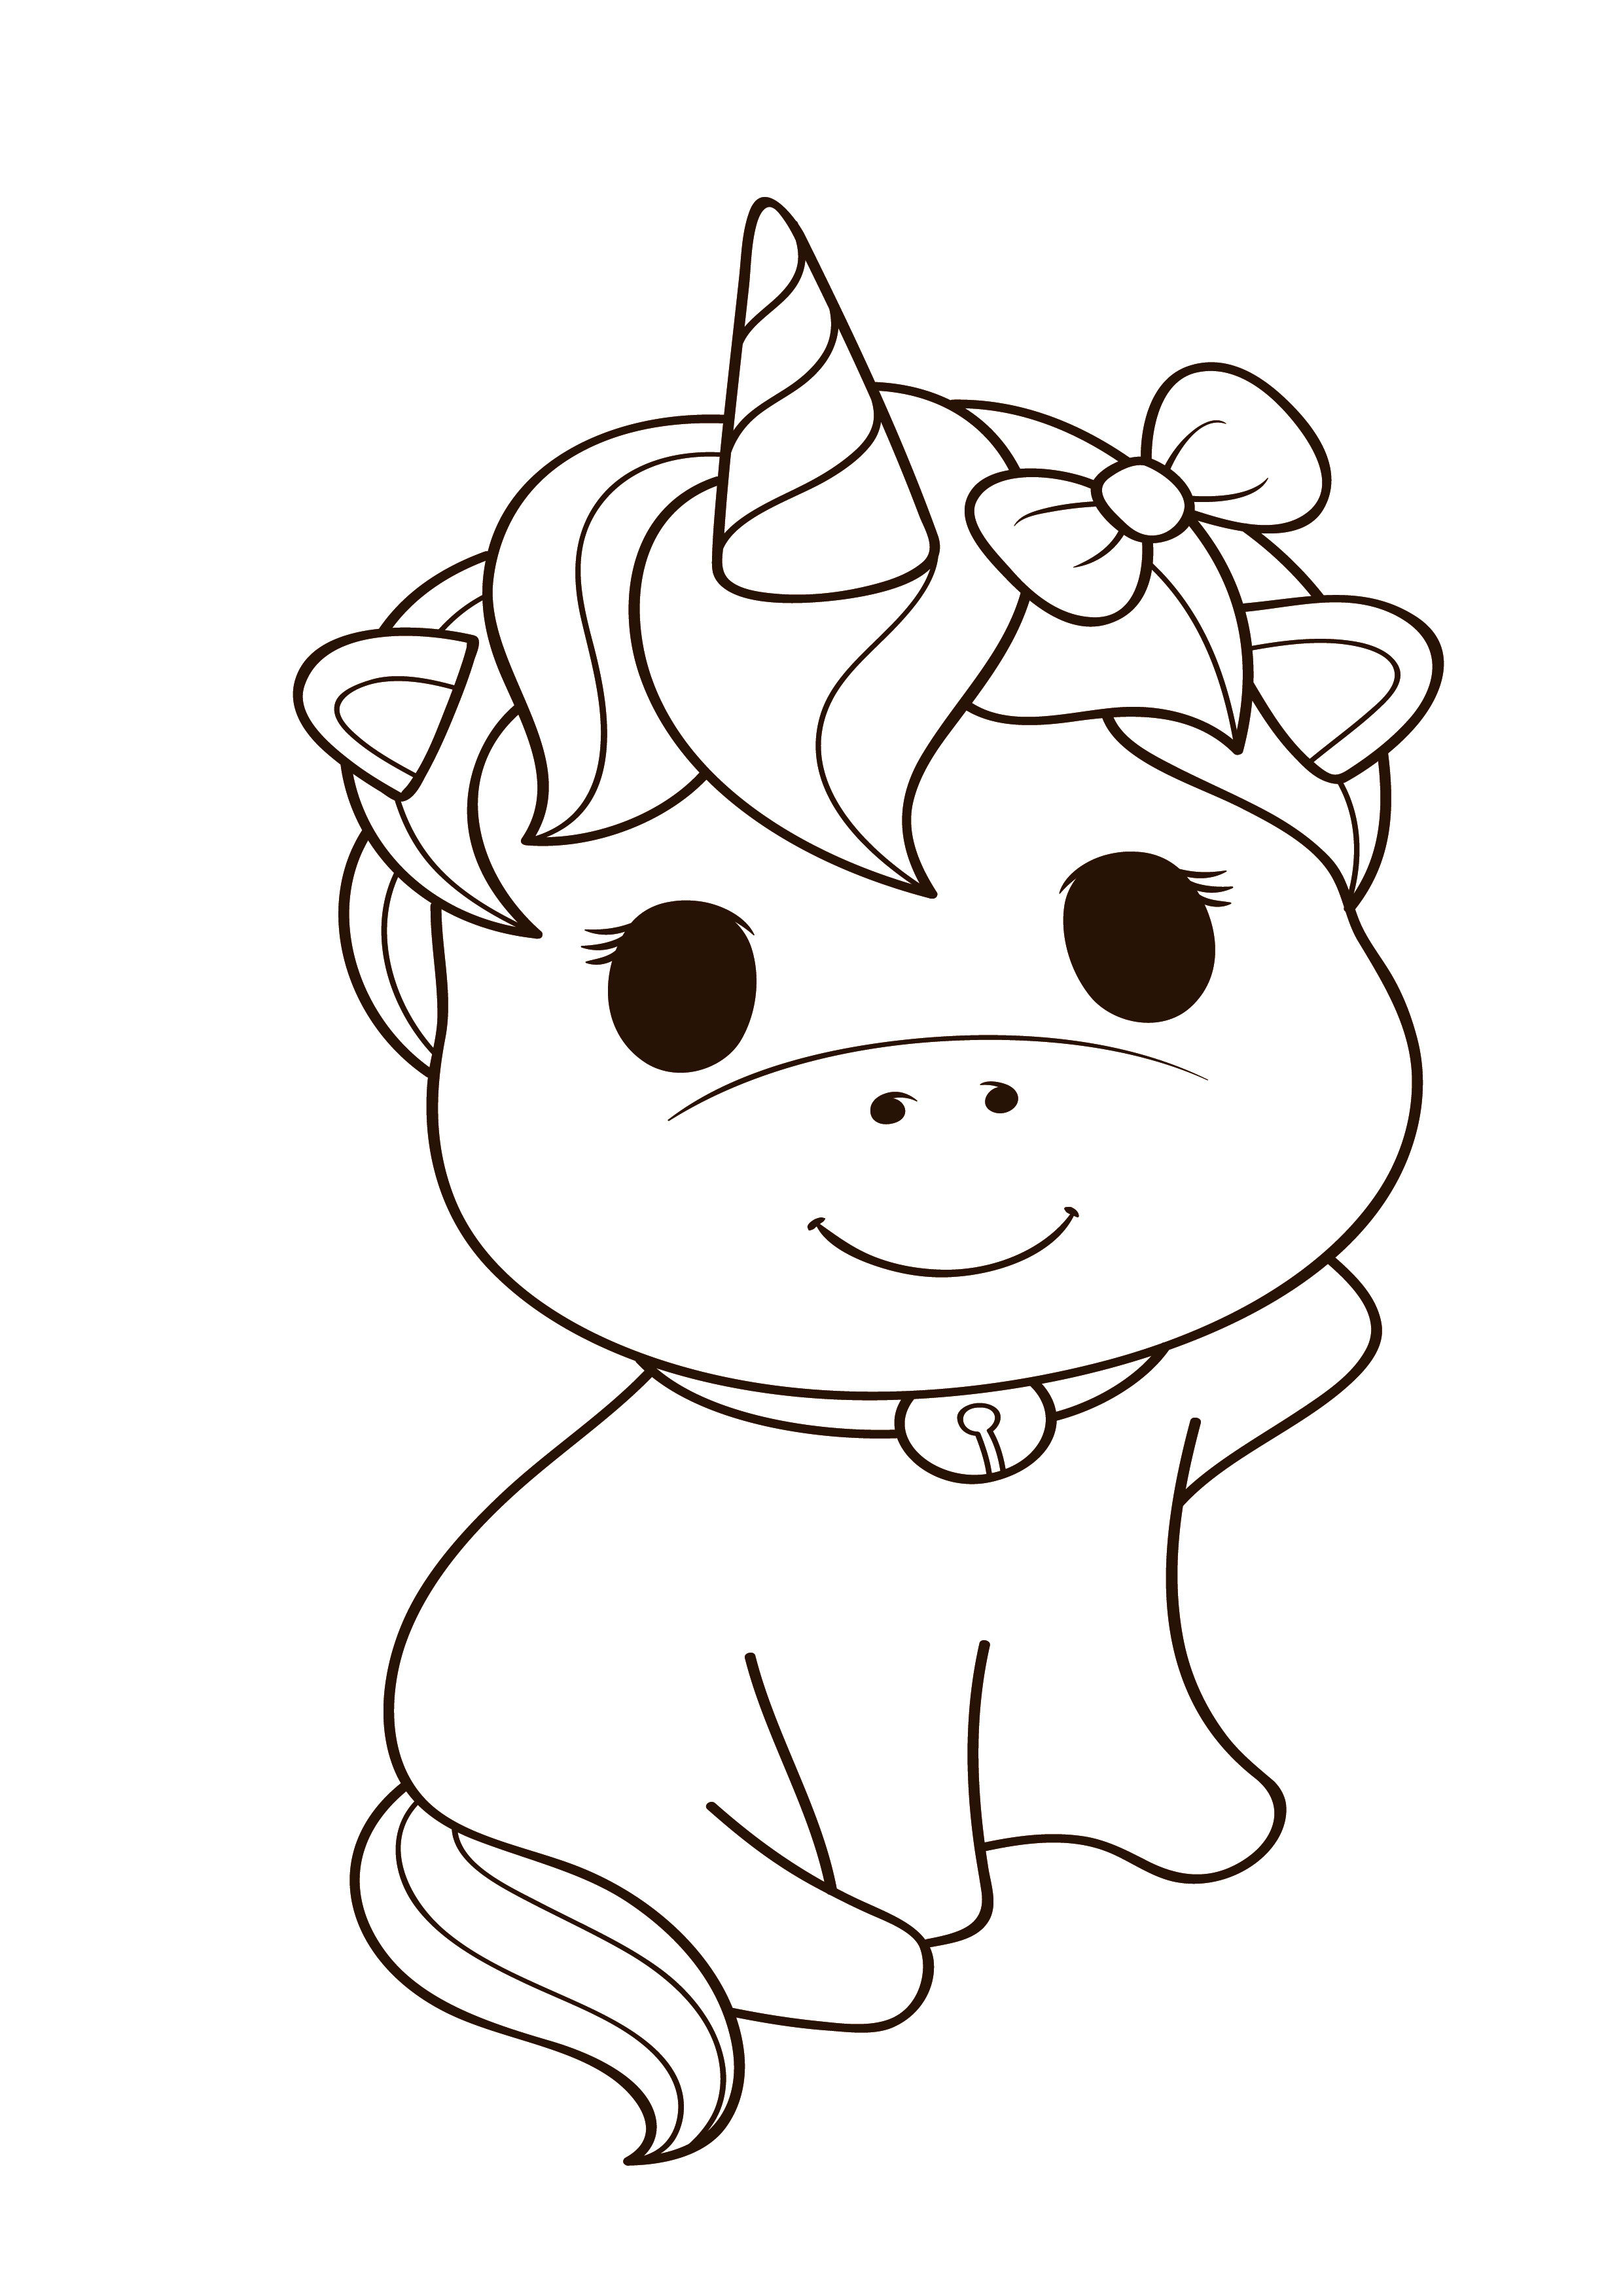 Give 20 cute baby unicorn coloring pages in 20 hrs by Sopnaislam20 ...